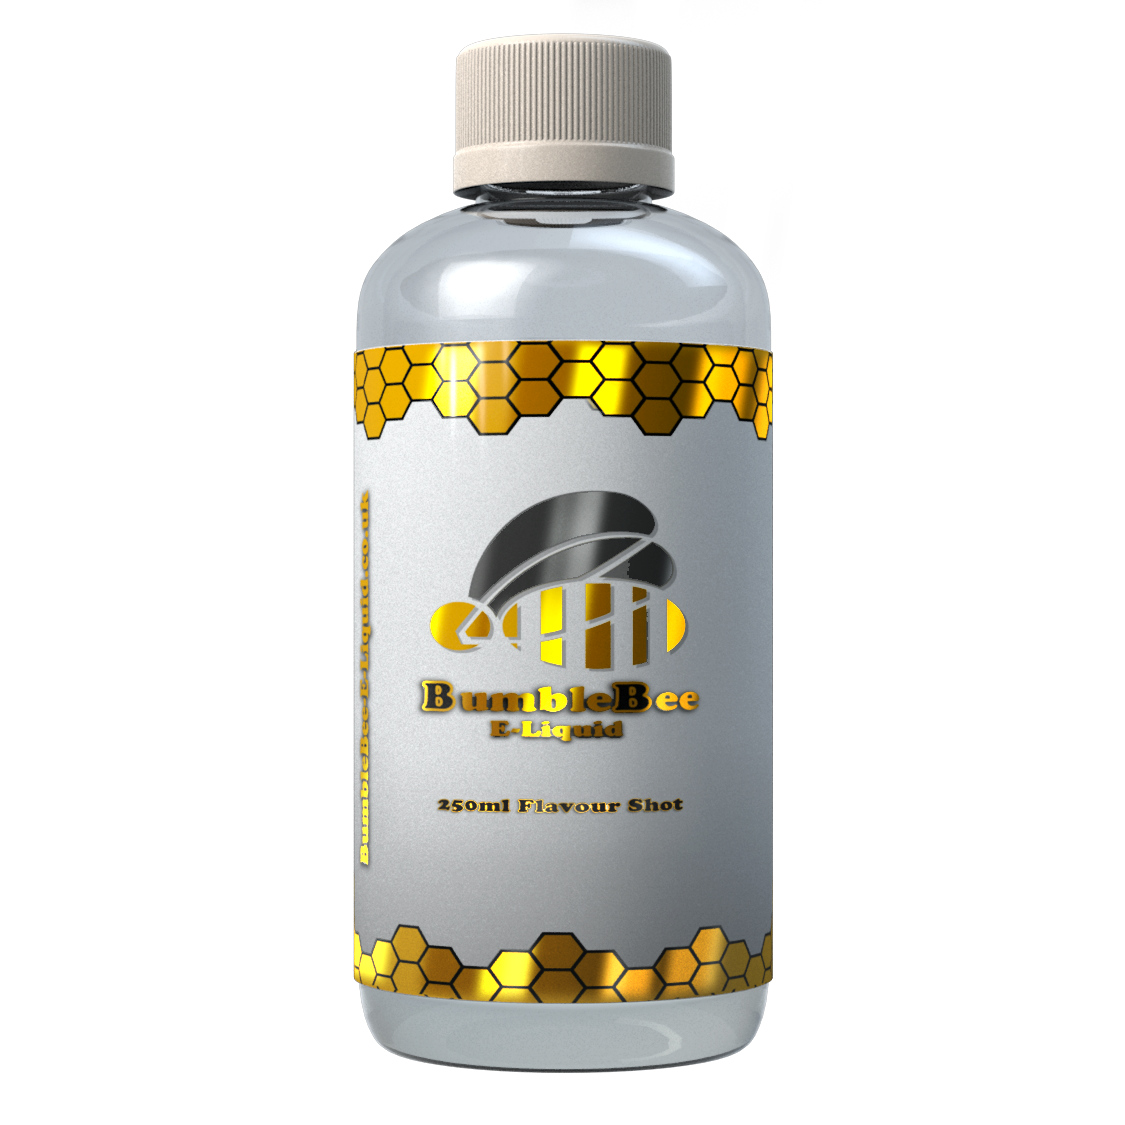 Tropical Waves Flavour Shot by Bumblebee - 250ml